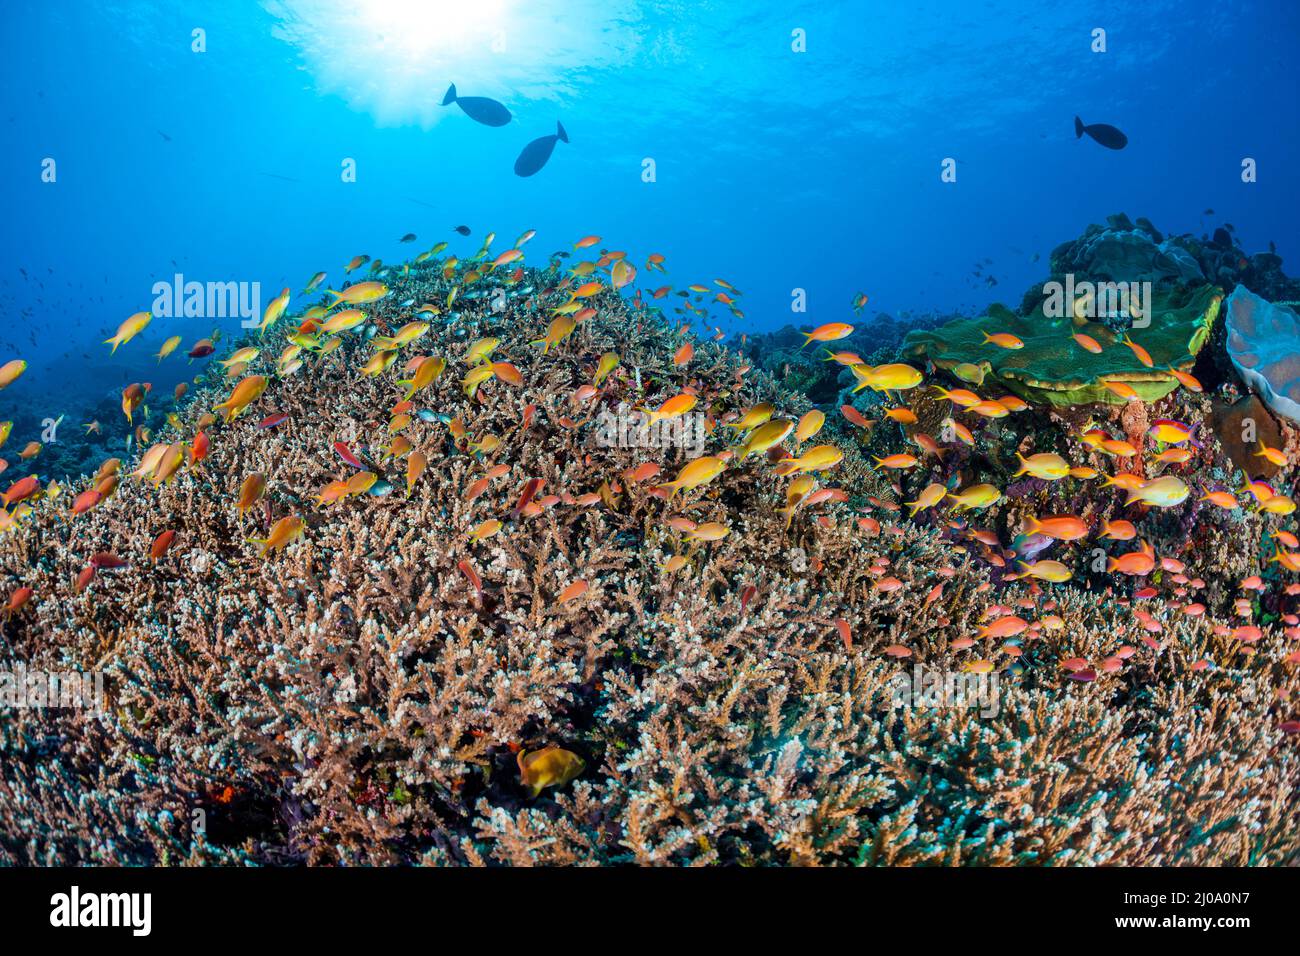 Delicate hard coral along with schooling anthias and various reef fish, dominate this underwater scene, Bali Island, Indonesia, Pacific Ocean. Stock Photo